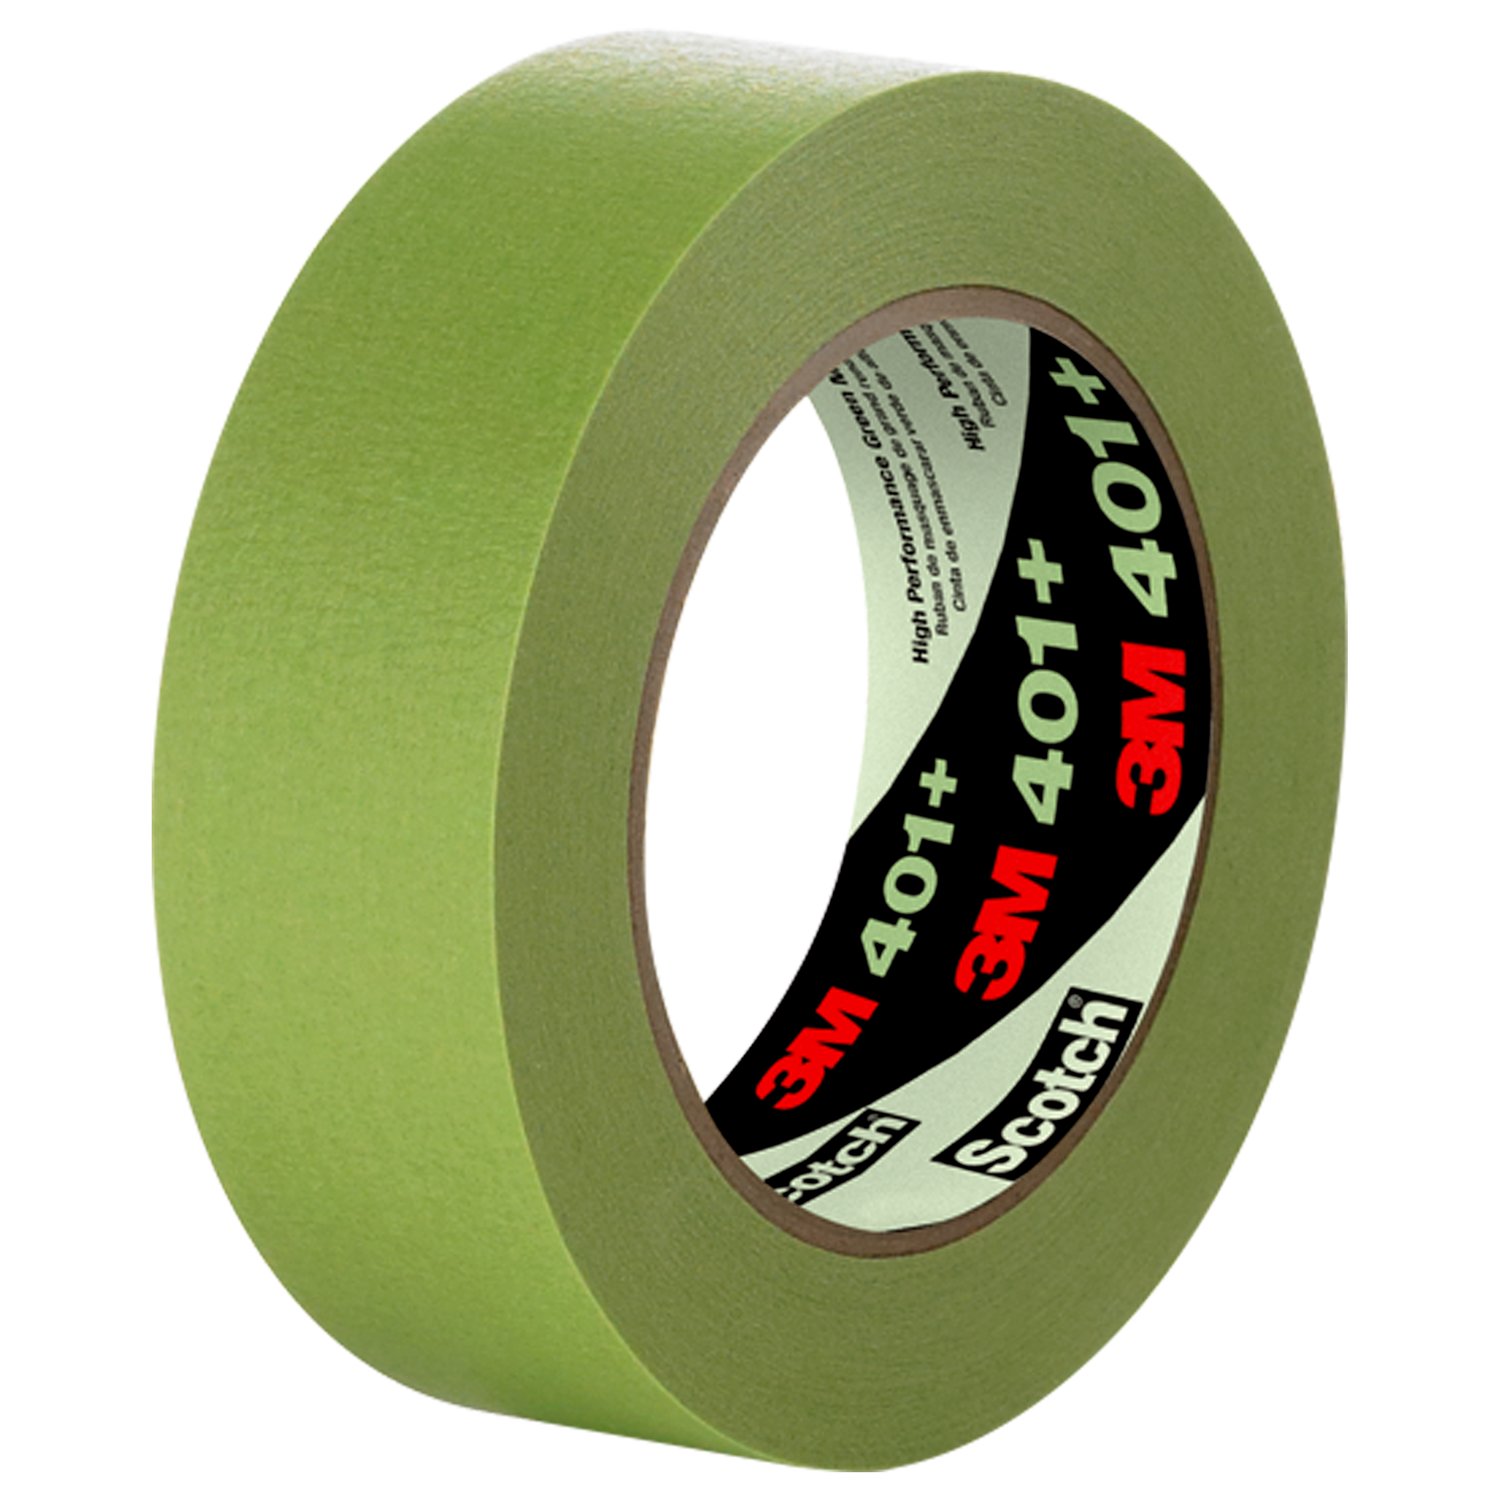 7100150661 - 3M High Performance Green Masking Tape 401+, 24 in x 60 yd, 6.7mil,
1/Case